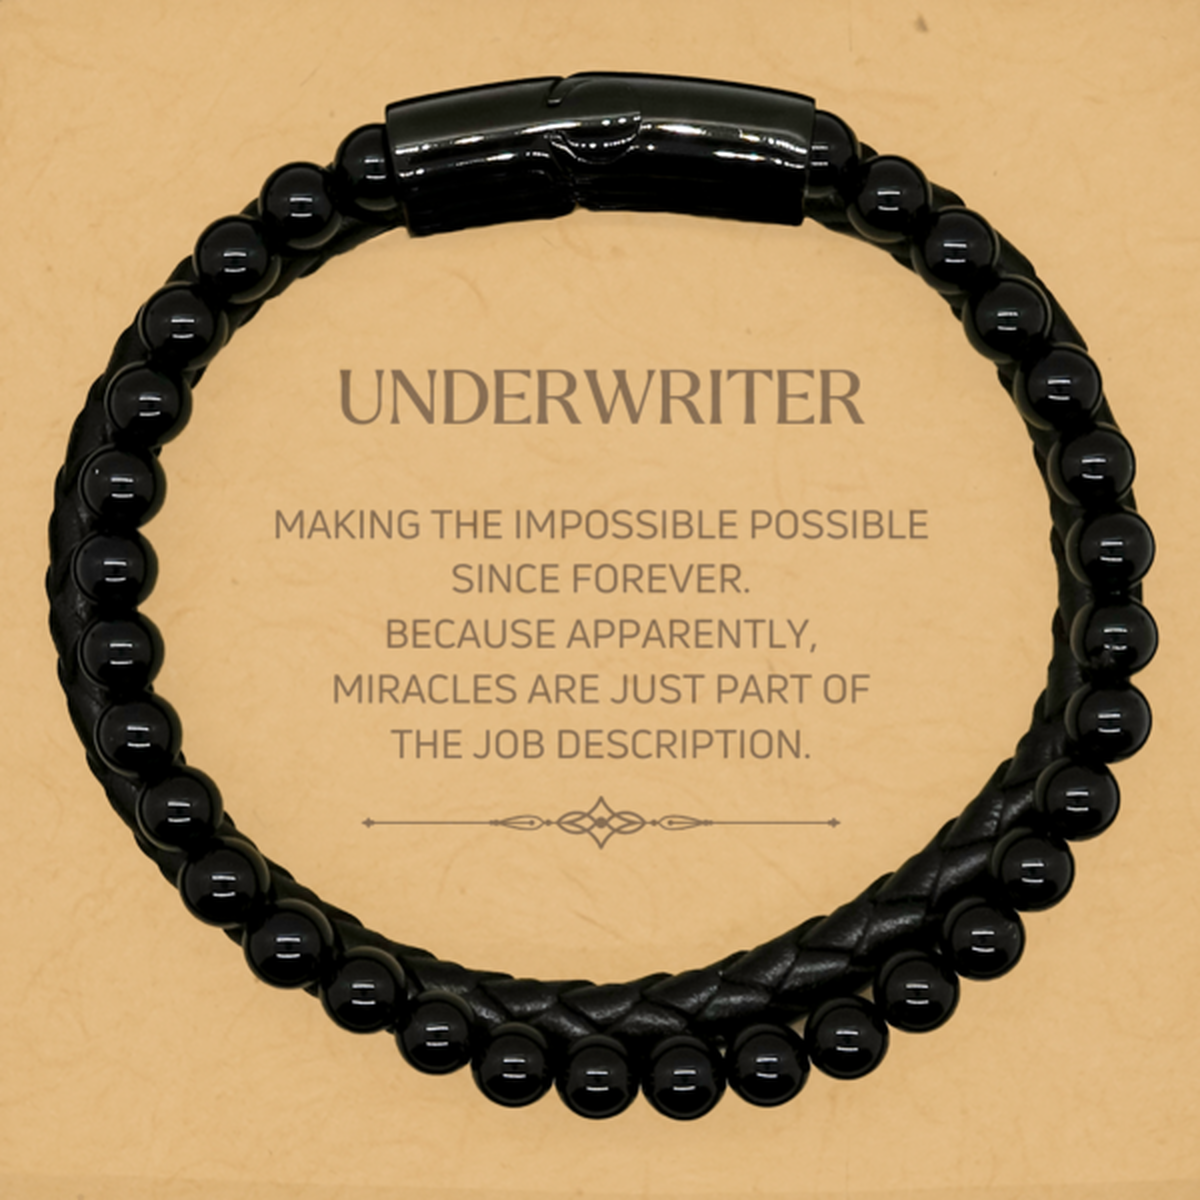 Funny Underwriter Gifts, Miracles are just part of the job description, Inspirational Birthday Stone Leather Bracelets For Underwriter, Men, Women, Coworkers, Friends, Boss